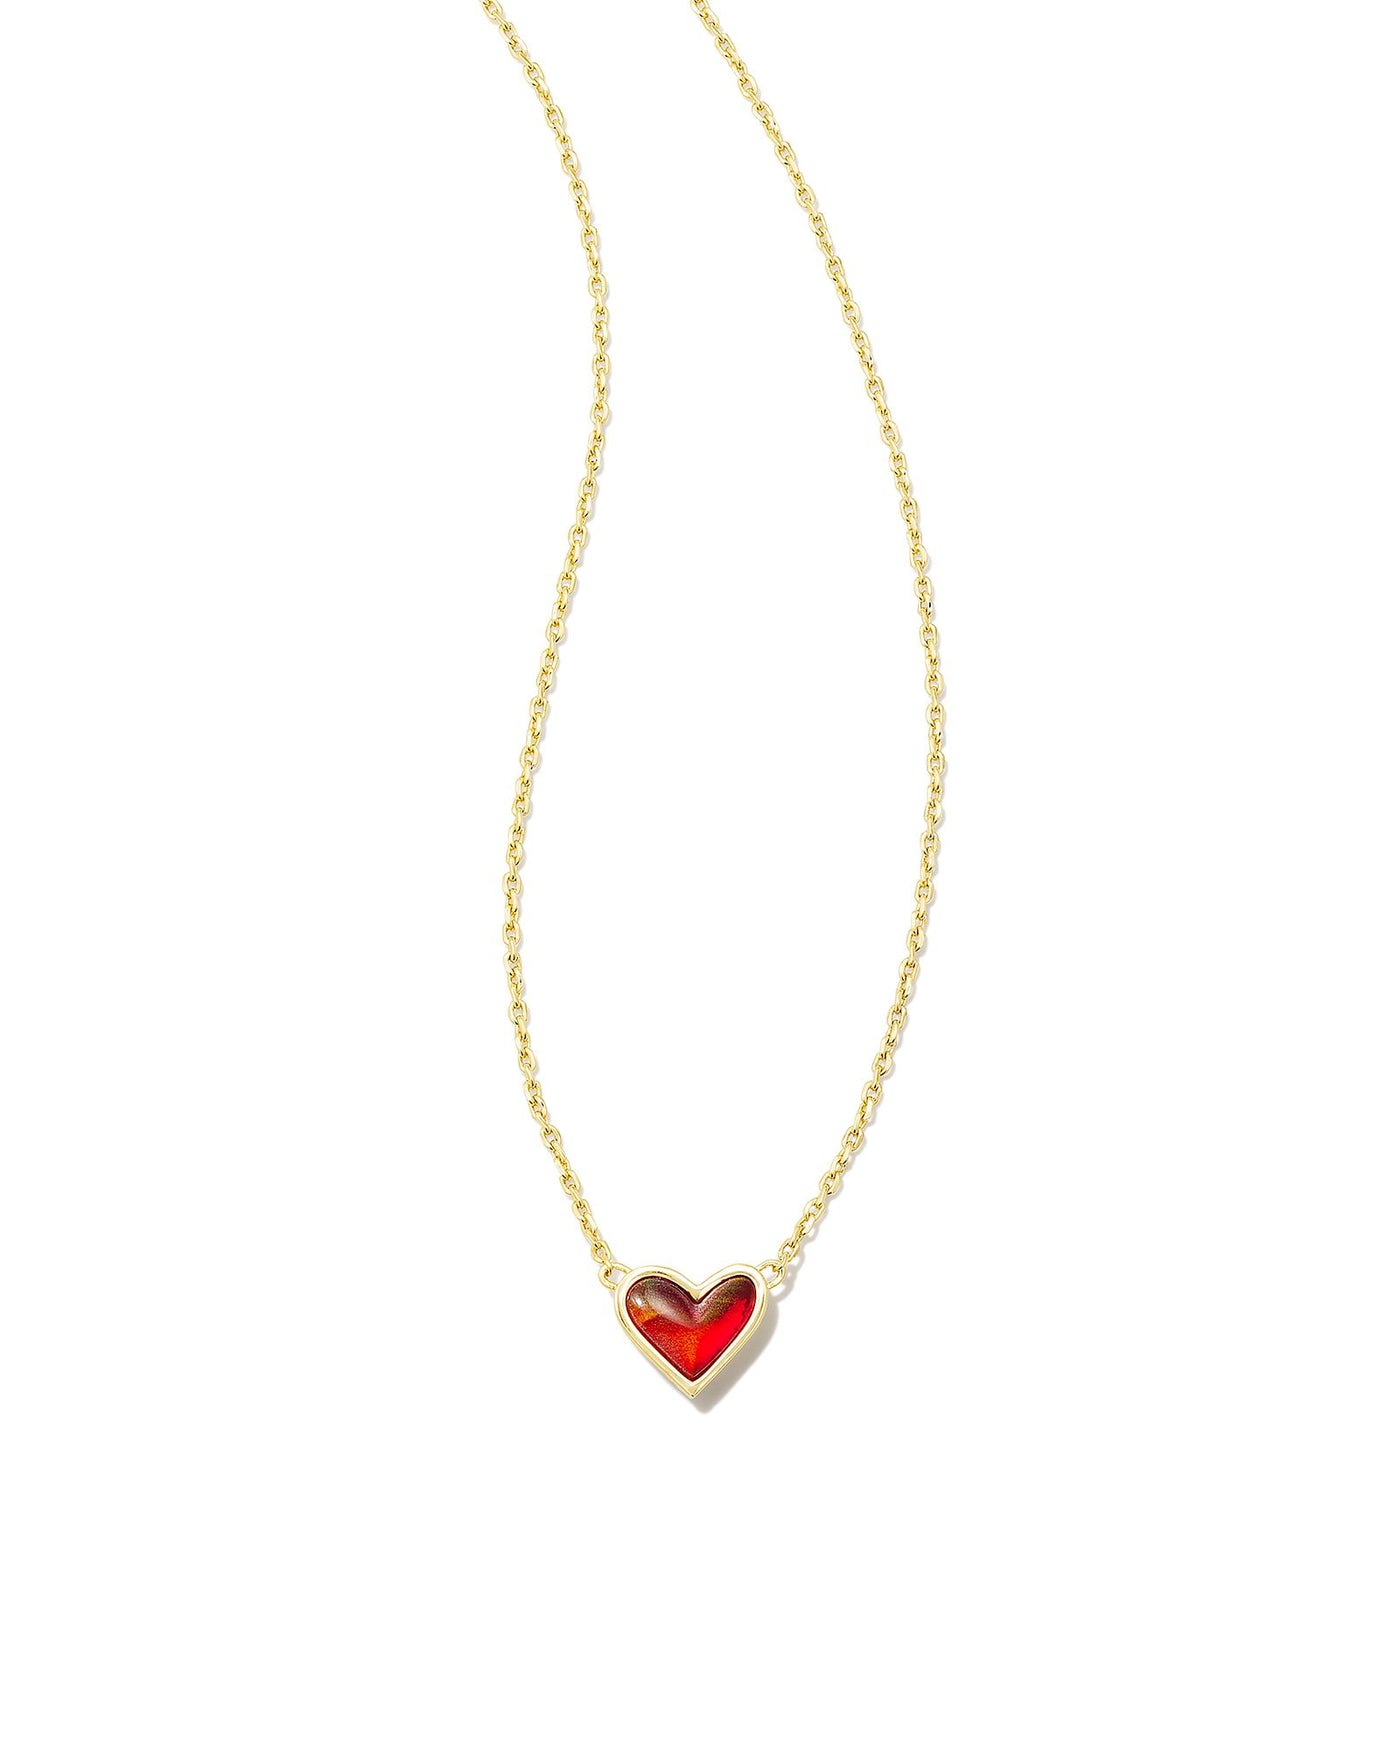 Kendra Scott Framed Ari Heart Short Pendant Necklace-Necklaces-Kendra Scott-Market Street Nest, Fashionable Clothing, Shoes and Home Décor Located in Mabank, TX